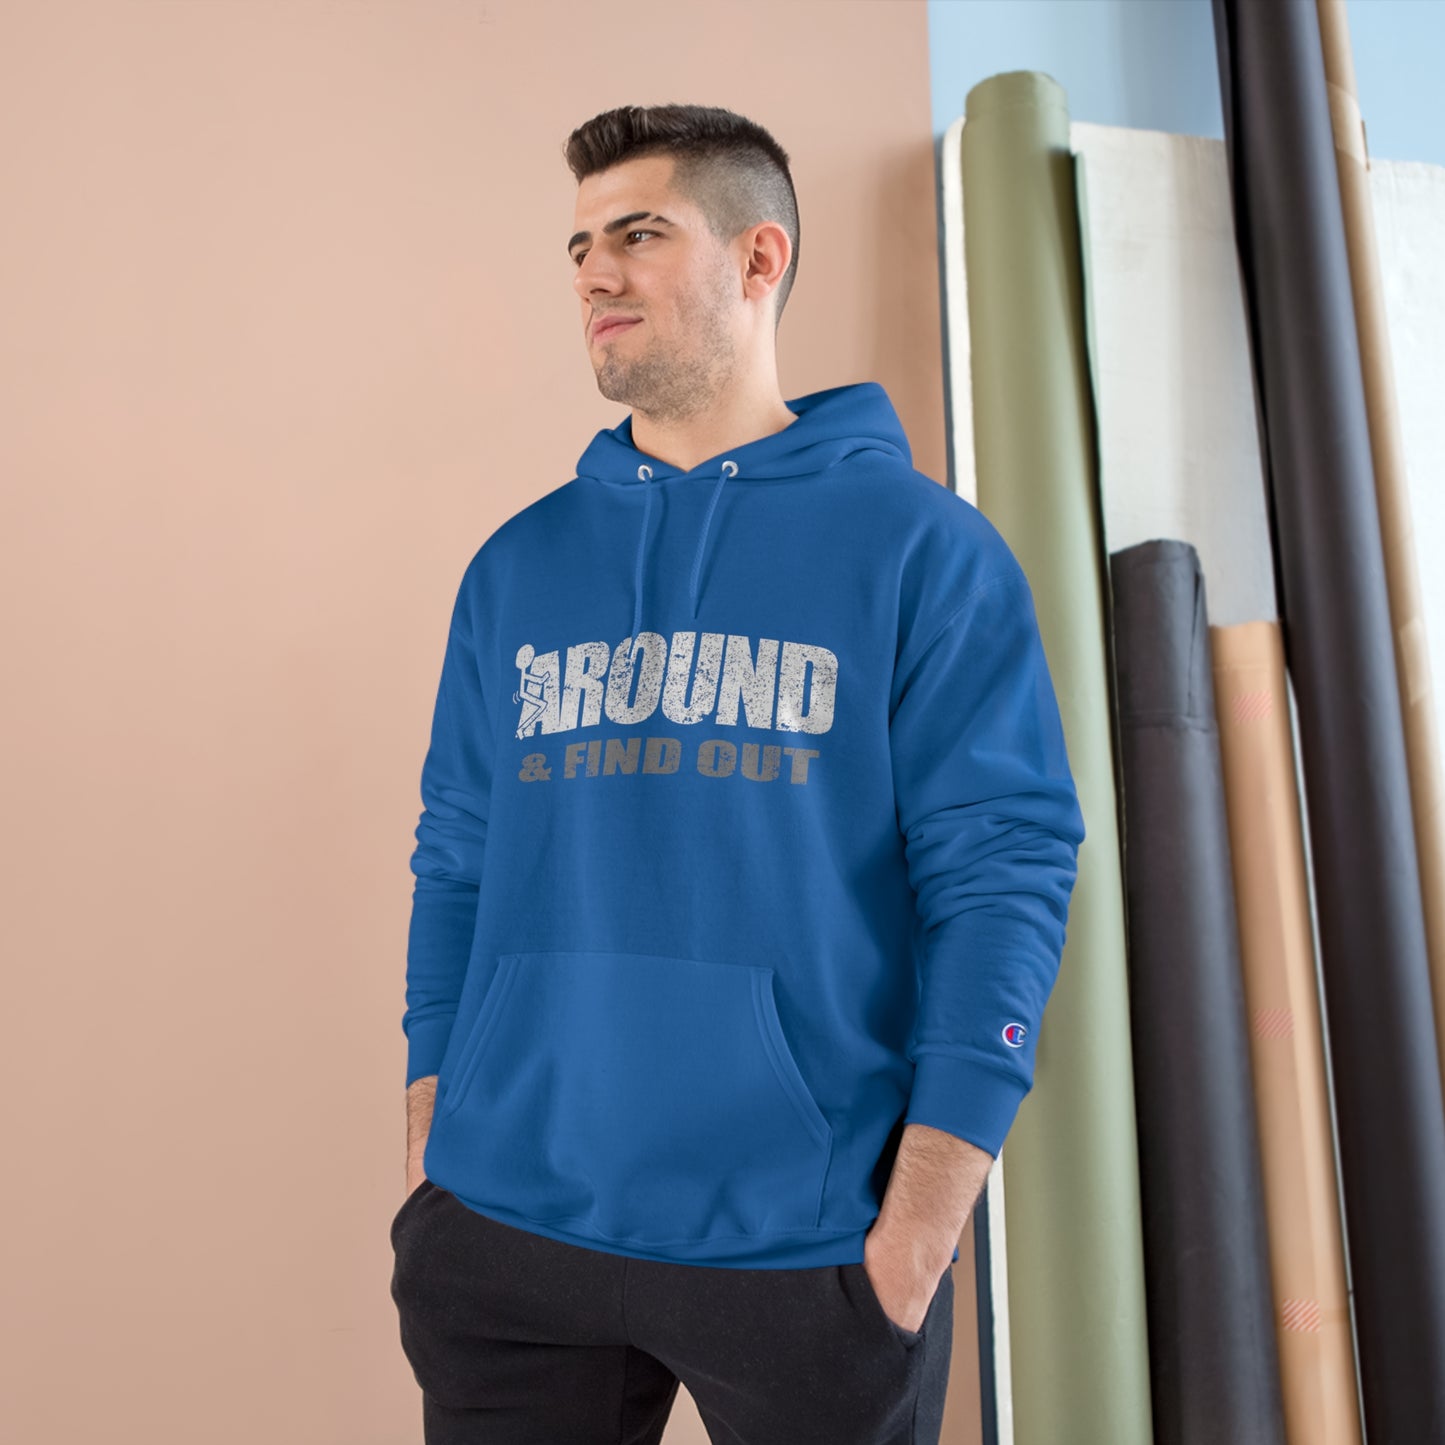 F#*k around and find out Champion Hoodie - Royal Blue / S - Royal Blue / M - Royal Blue / L - Royal Blue / XL - Royal Blue / 2XL